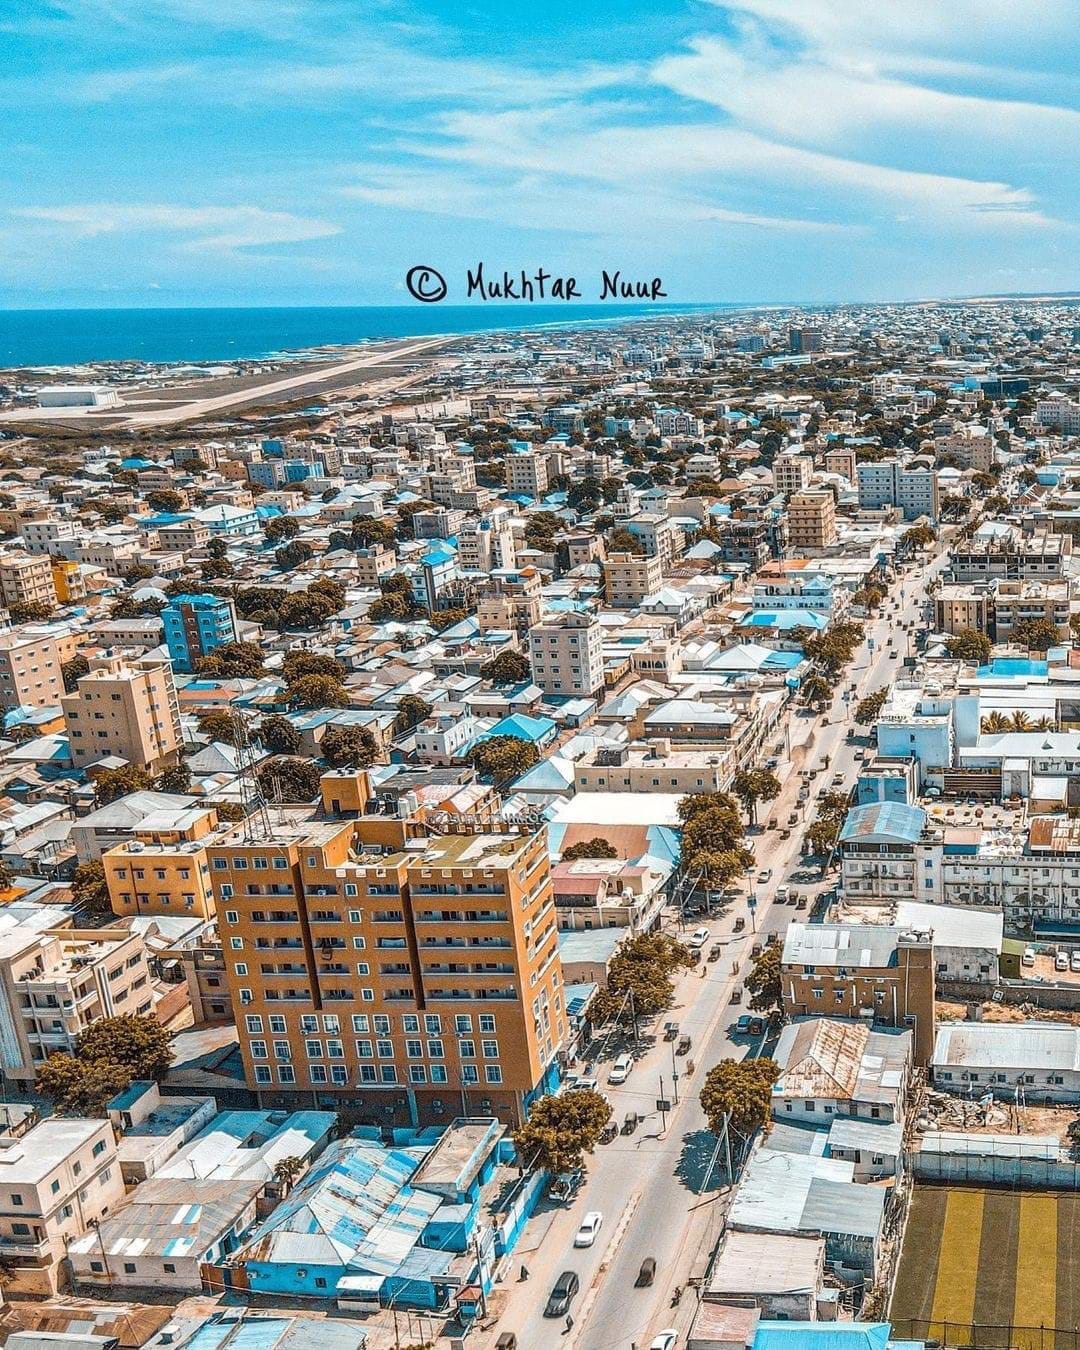 An aerial view of downtown Mogadishu, showing a mix of mid-rise and low-rise buildings, with the sea in the background